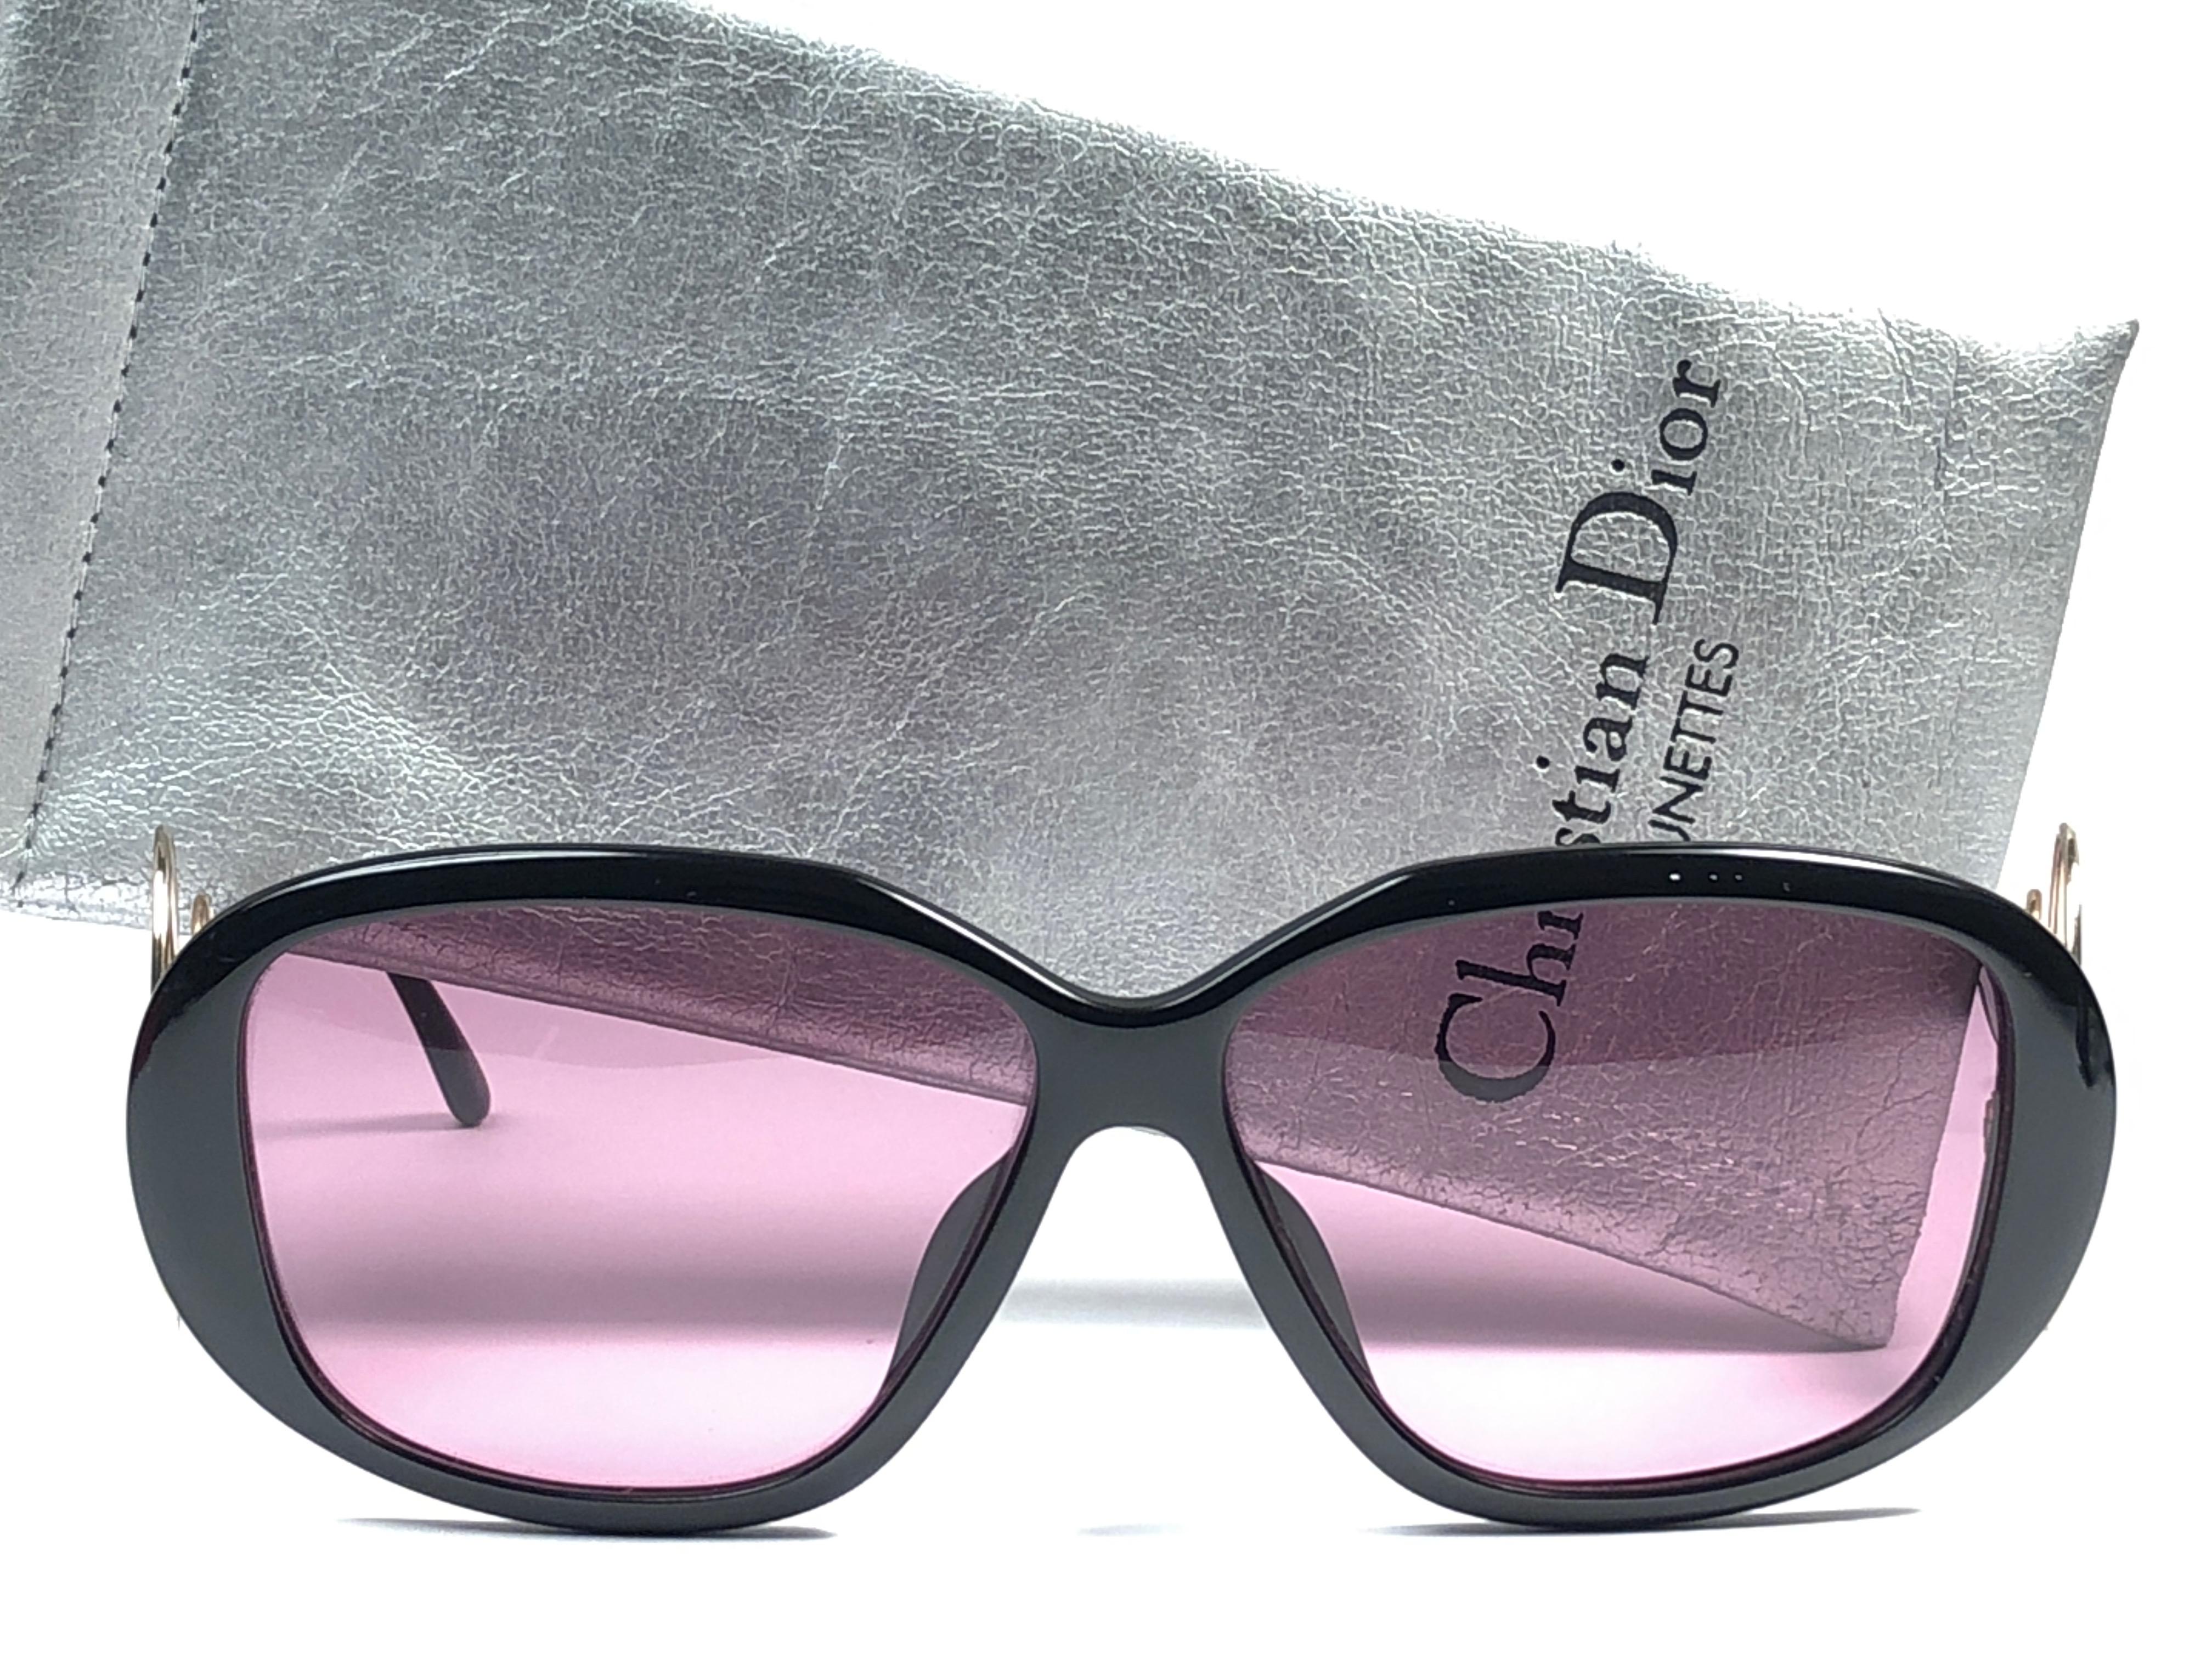 New Vintage Christian Dior 2558 90 black frame, gold circle accents with spotless light rose lenses. 

Made in Germany.
 
Produced and design in 1970's.

New, never worn or displayed. This item may show minor sign of wear due to storage. Comes with